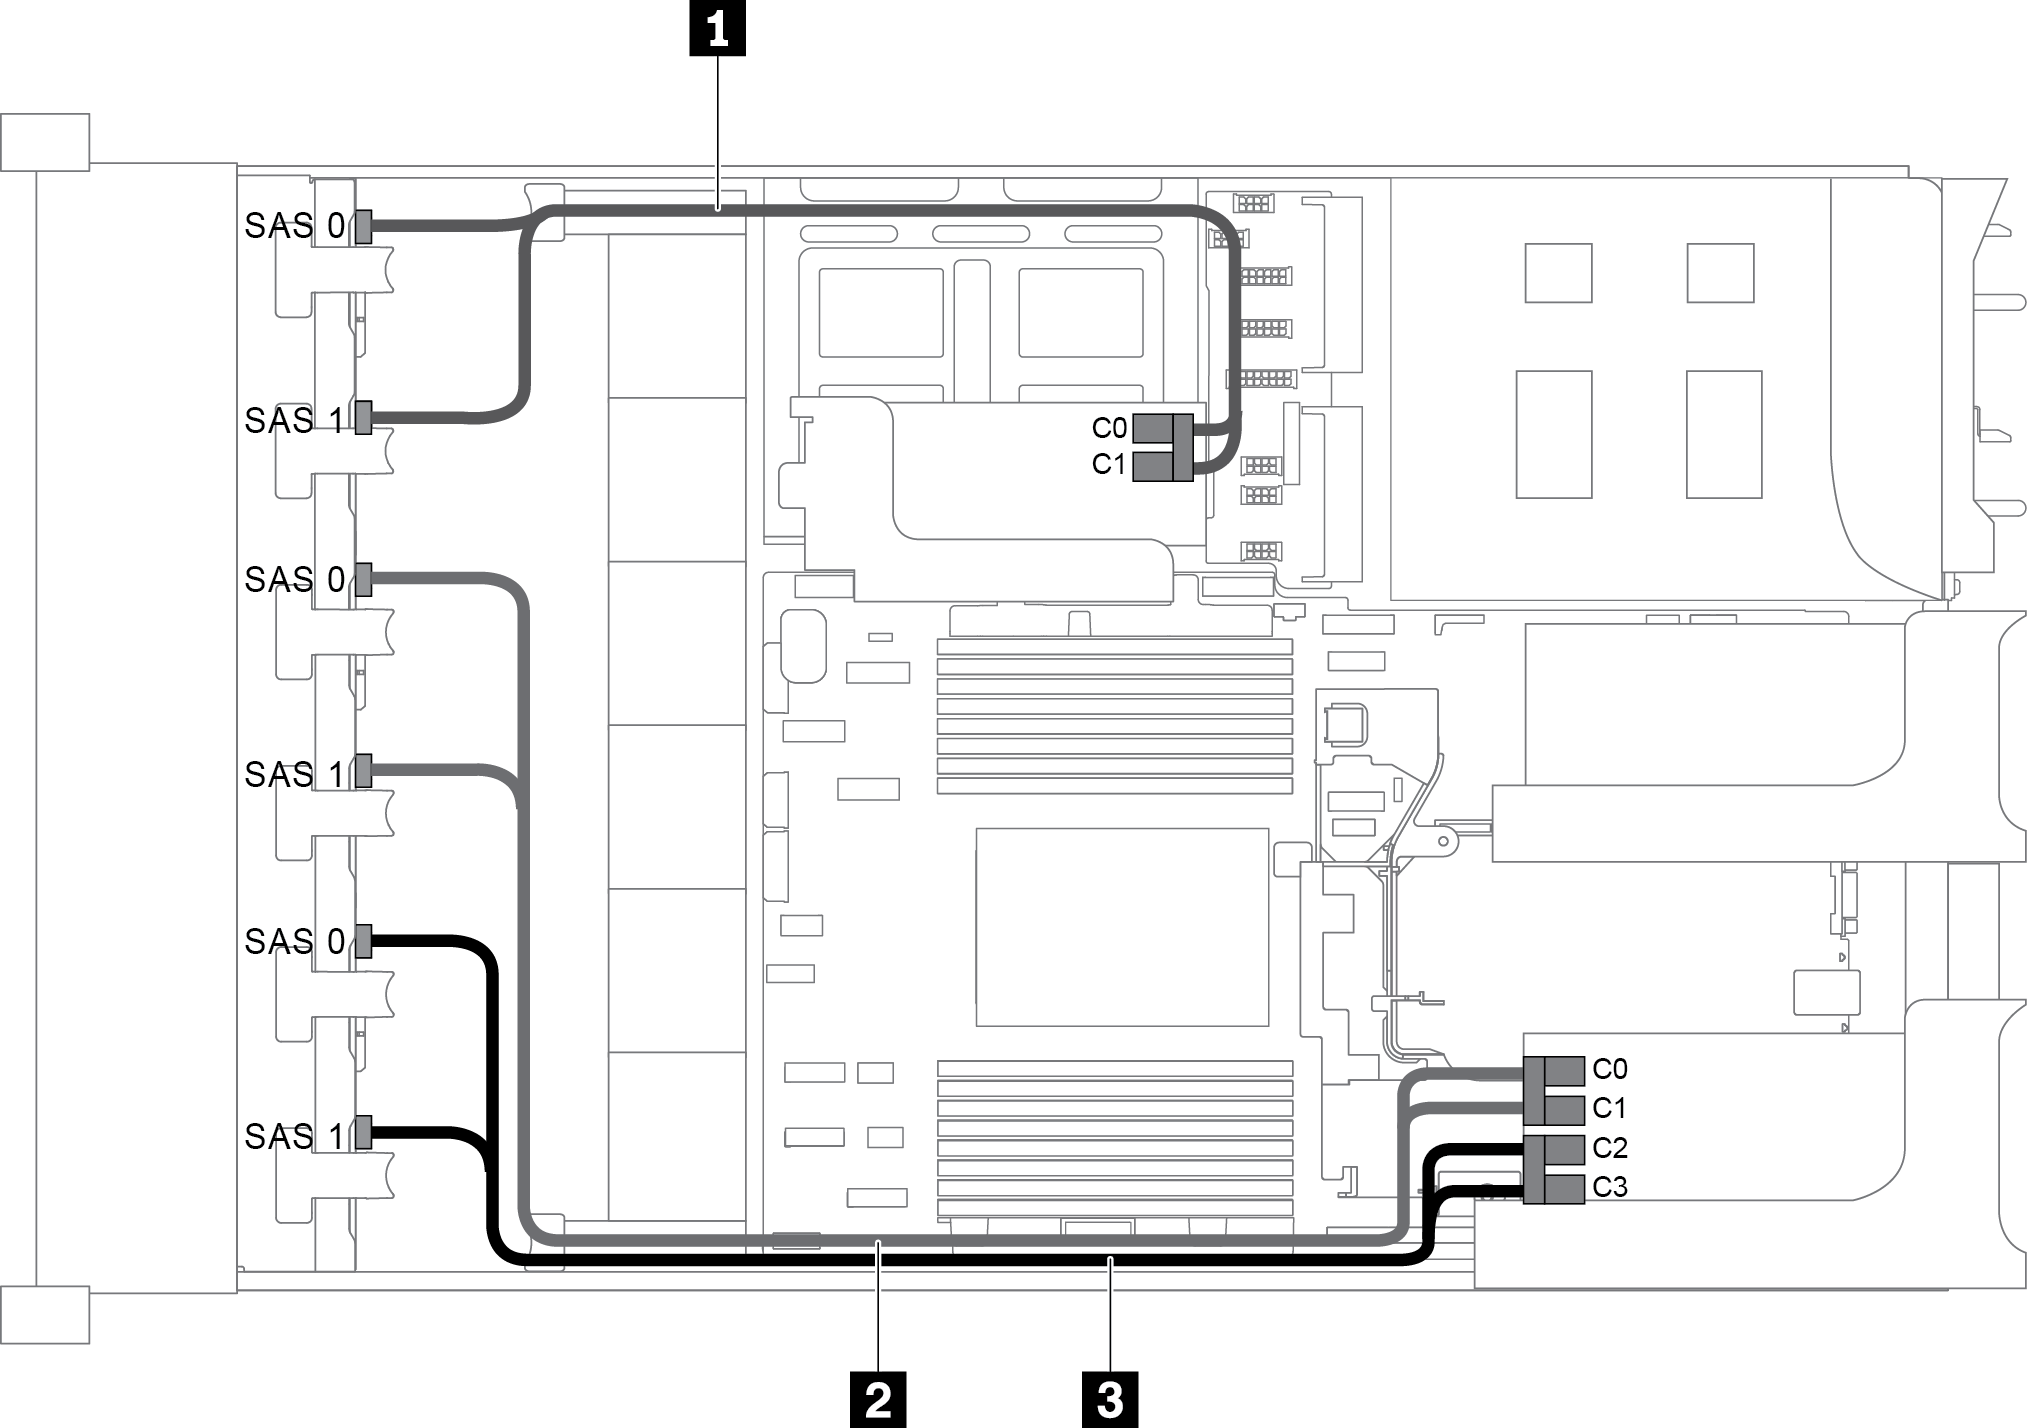 Cable routing for configuration with three 8 x 2.5" SAS/SATA front backplanes and two RAID/HBA adapters (8i+16i)